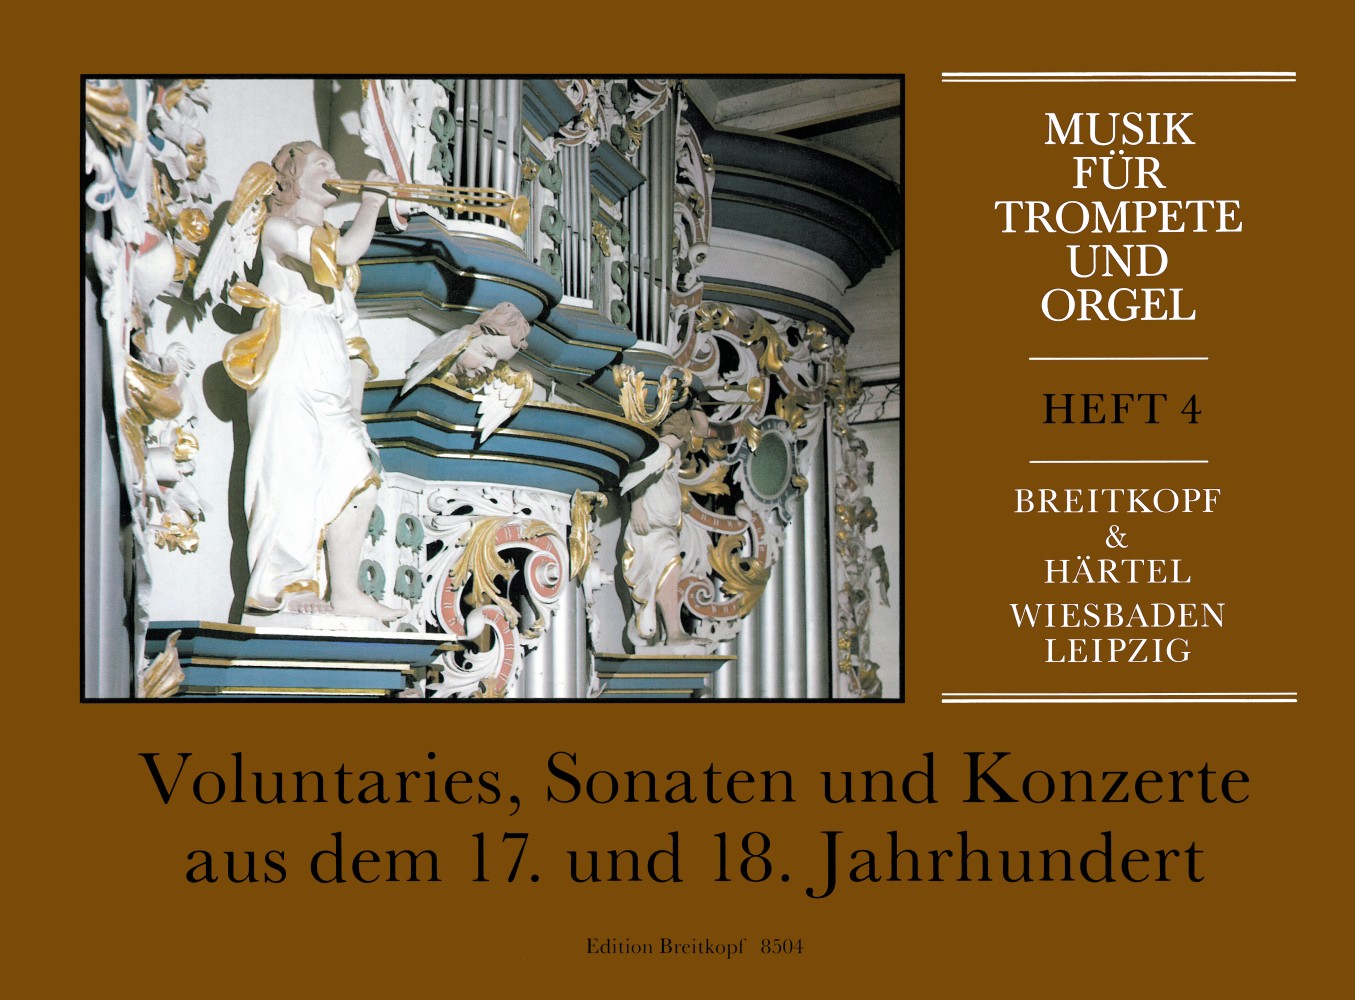 Music for Trumpet and Organ - Volume 4 (Voluntaries, Sonatas and Concerti from the 17th and 18th Century)